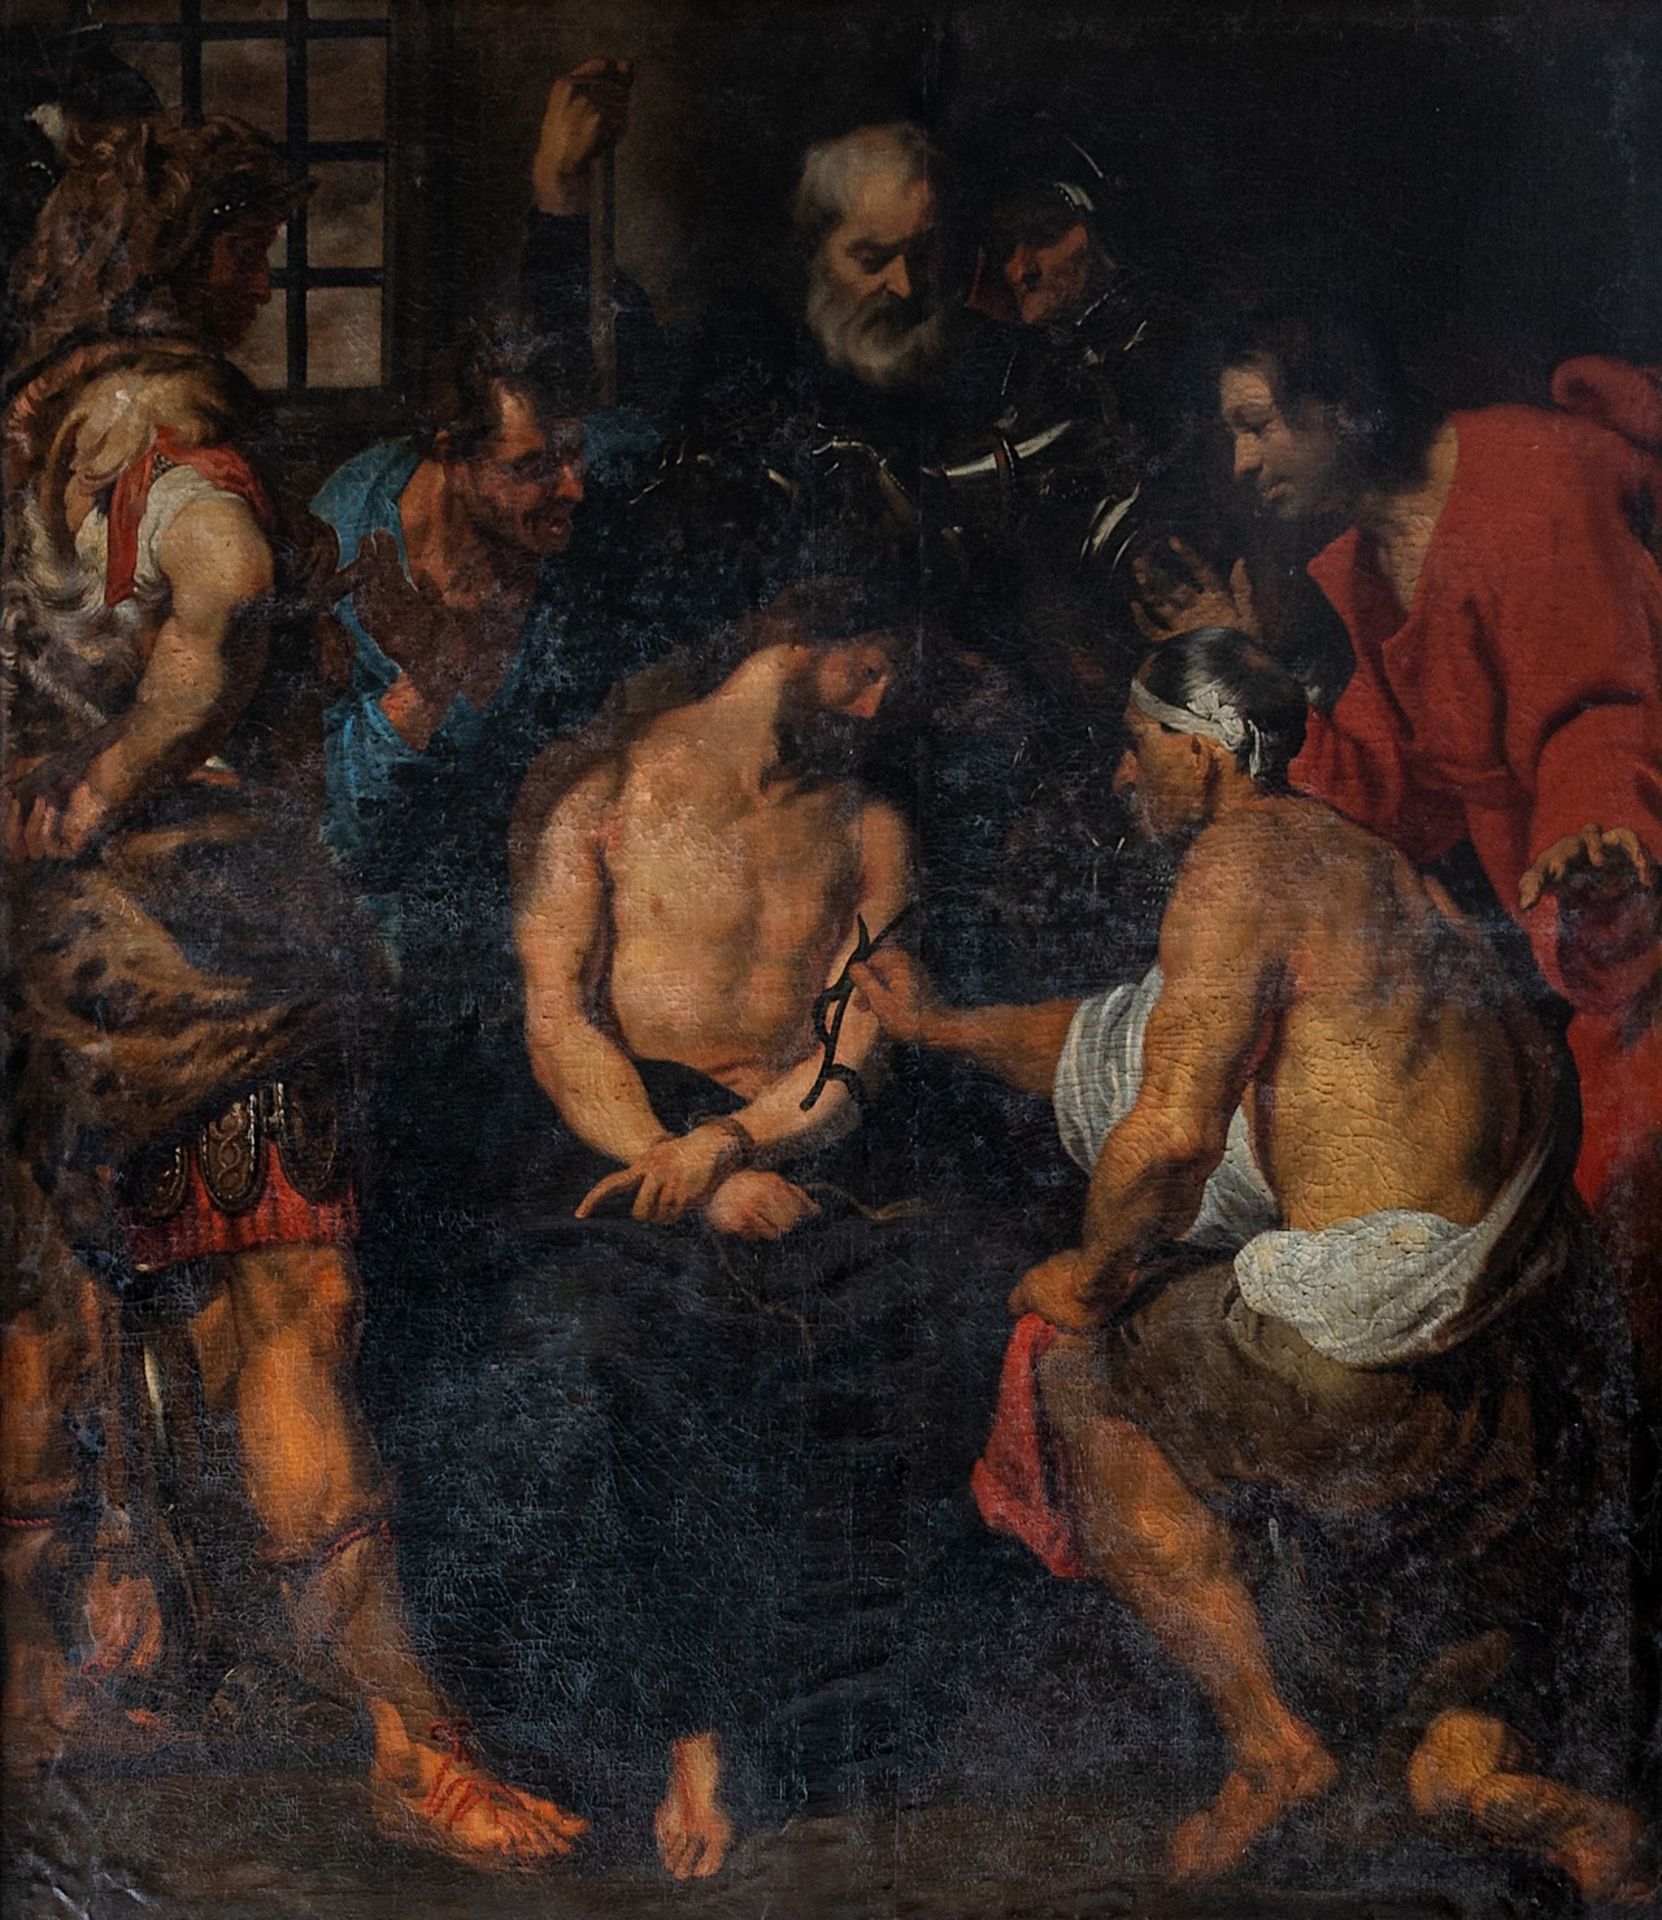 After Anthony van Dyck (1599-1641), 'Christ Crowned with Thorns', 17thC, oil on canvas 225 x 195 cm.